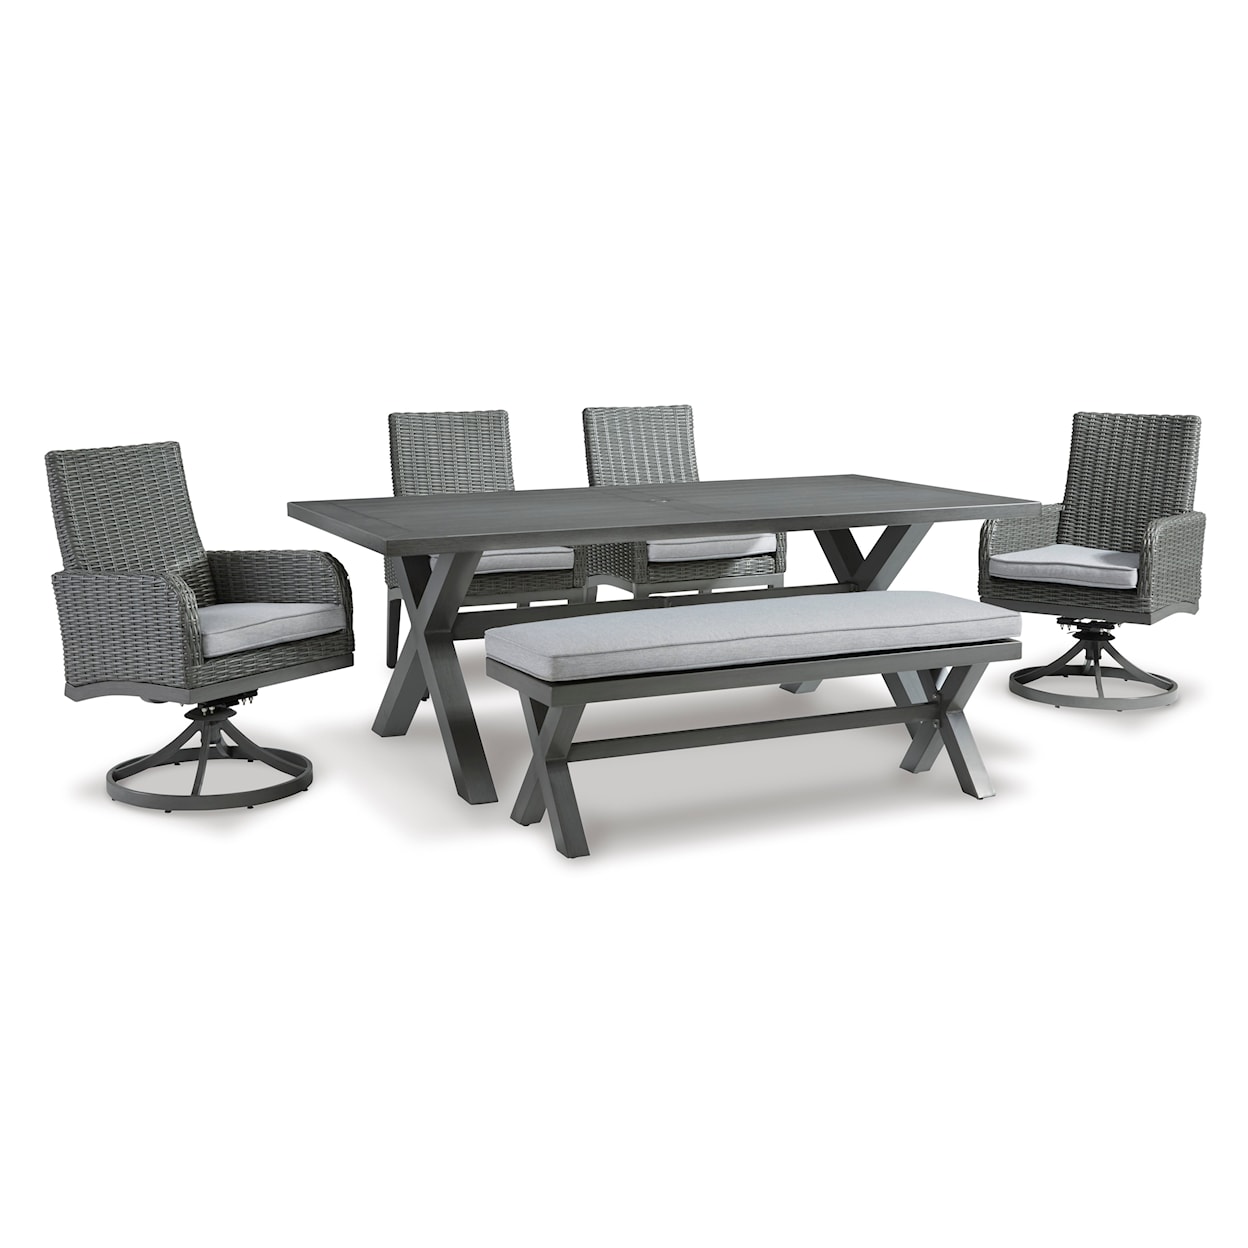 Signature Design by Ashley Elite Park 6-Piece Outdoor Dining Set with Bench